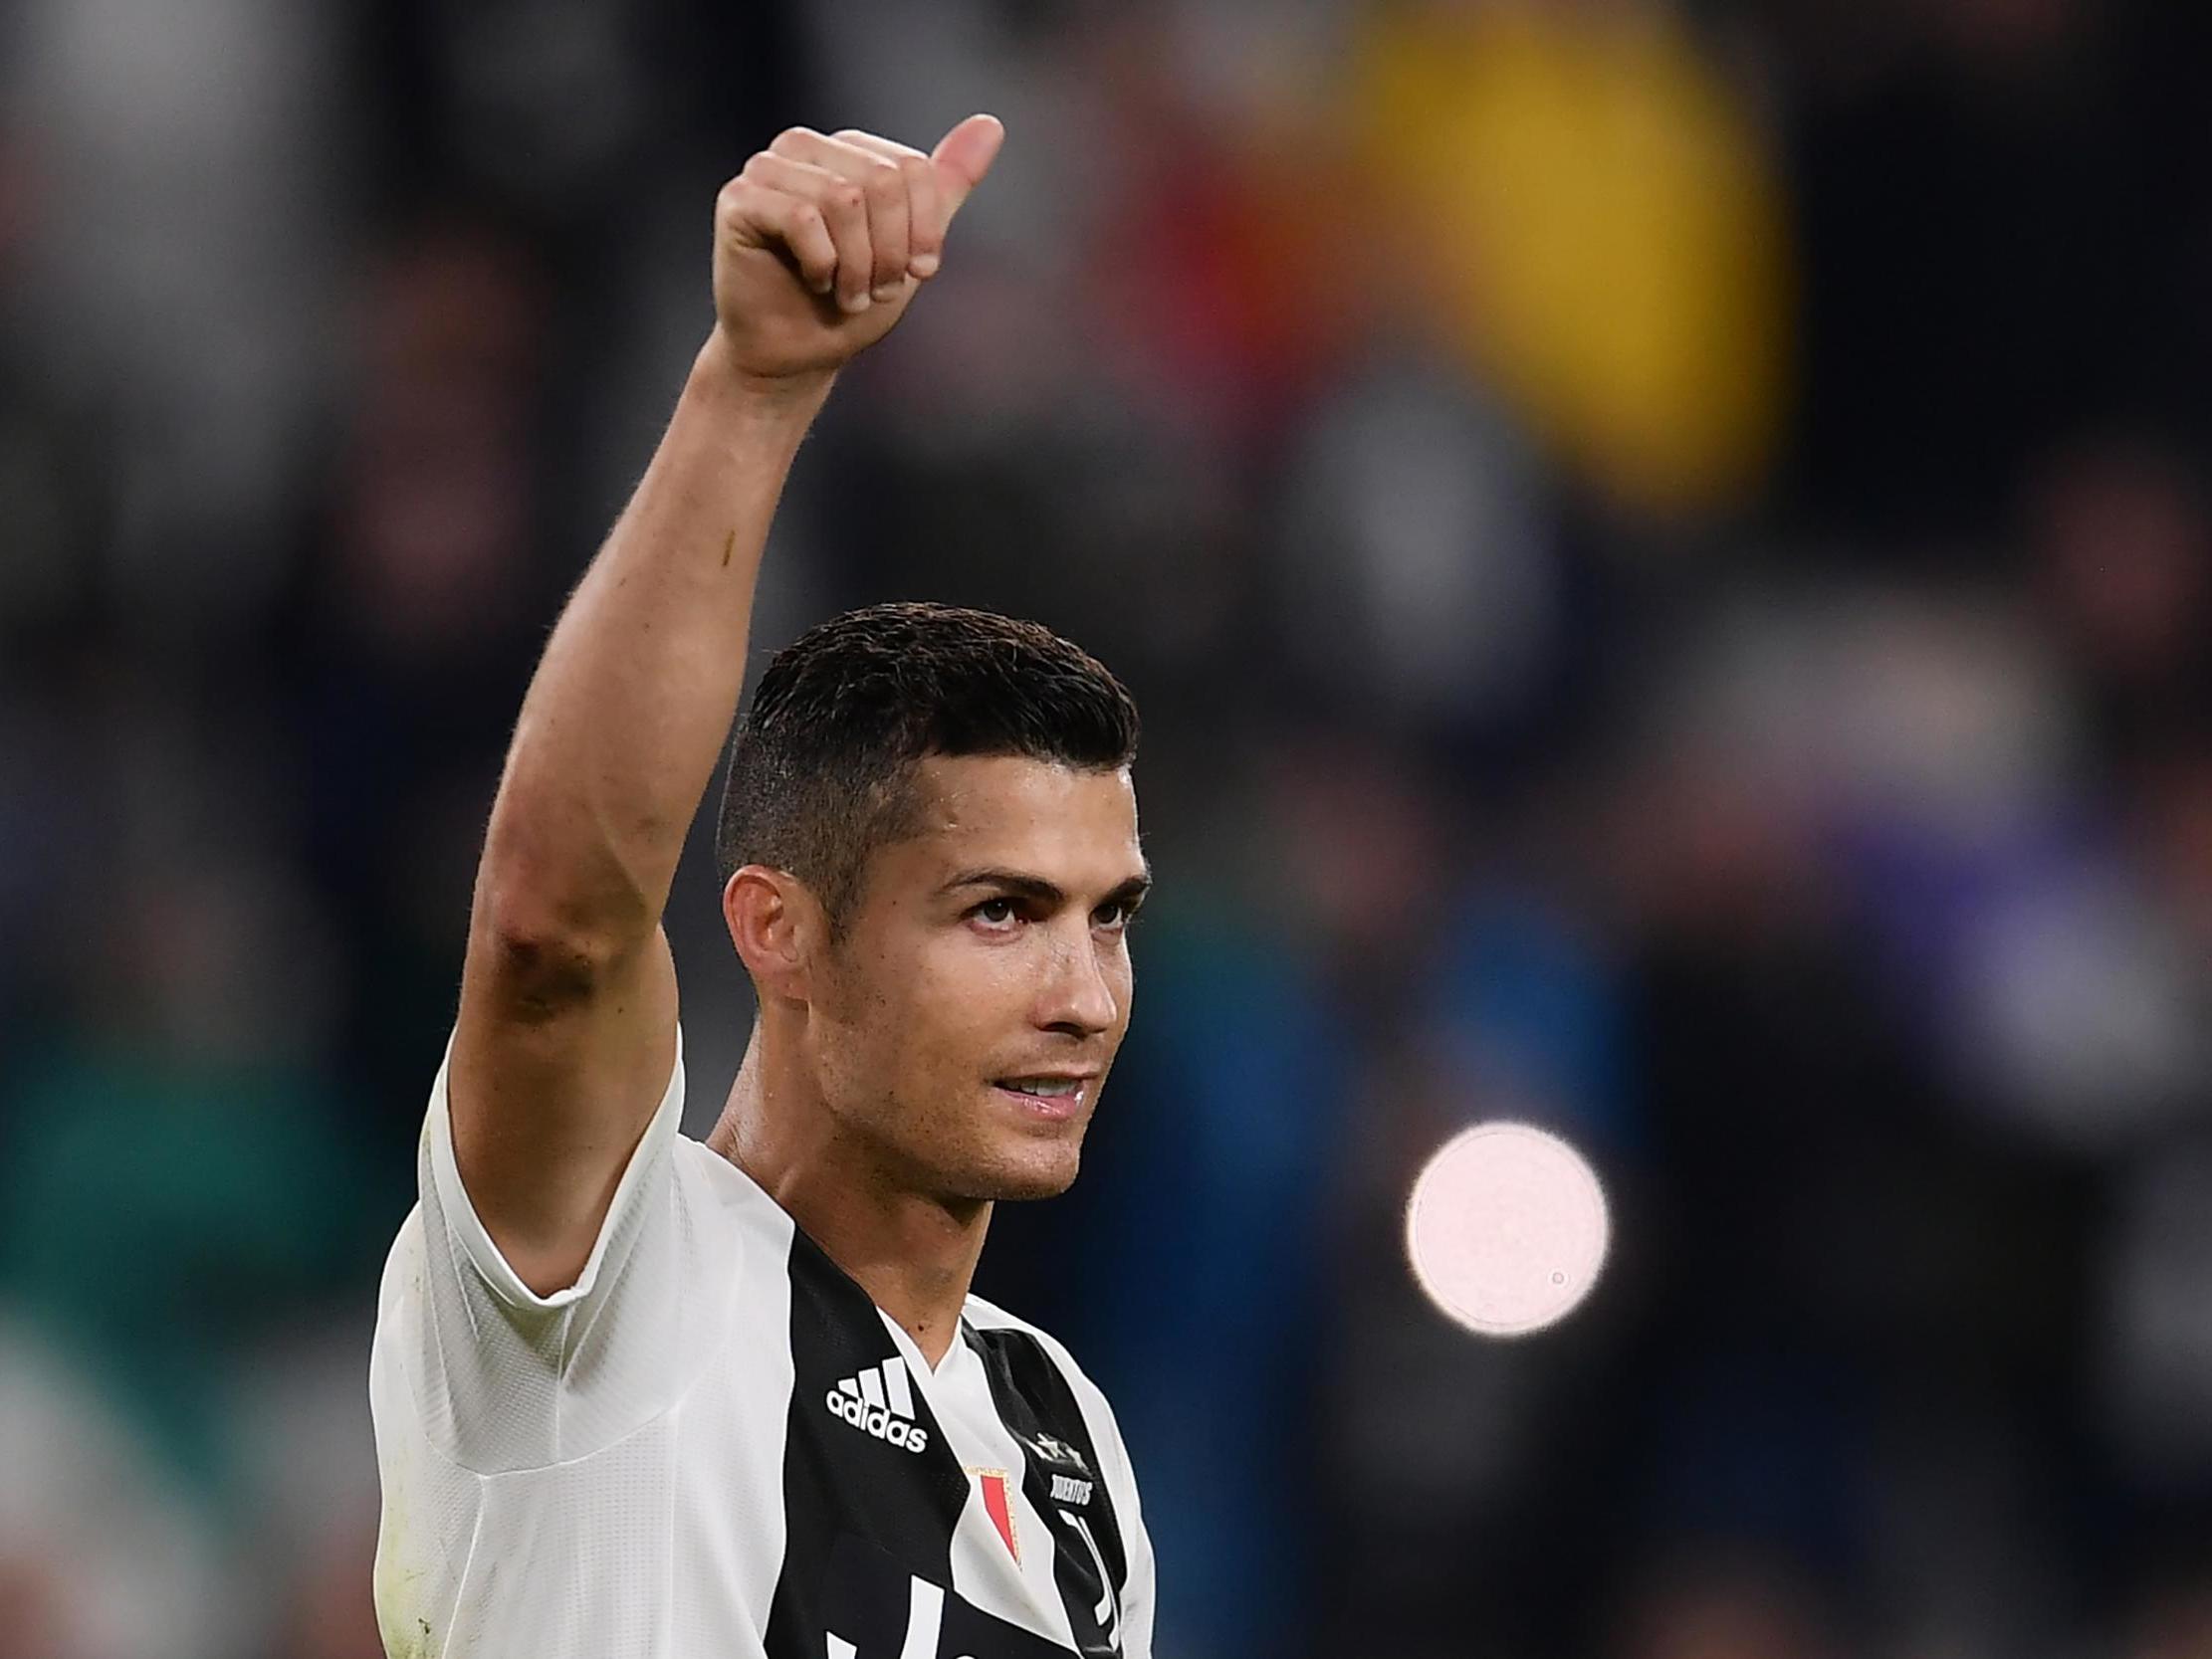 Many have refused to even entertain the possibility that Cristiano Ronaldo, a five-time Ballon d'Or winner and giant of the game, could have raped a woman